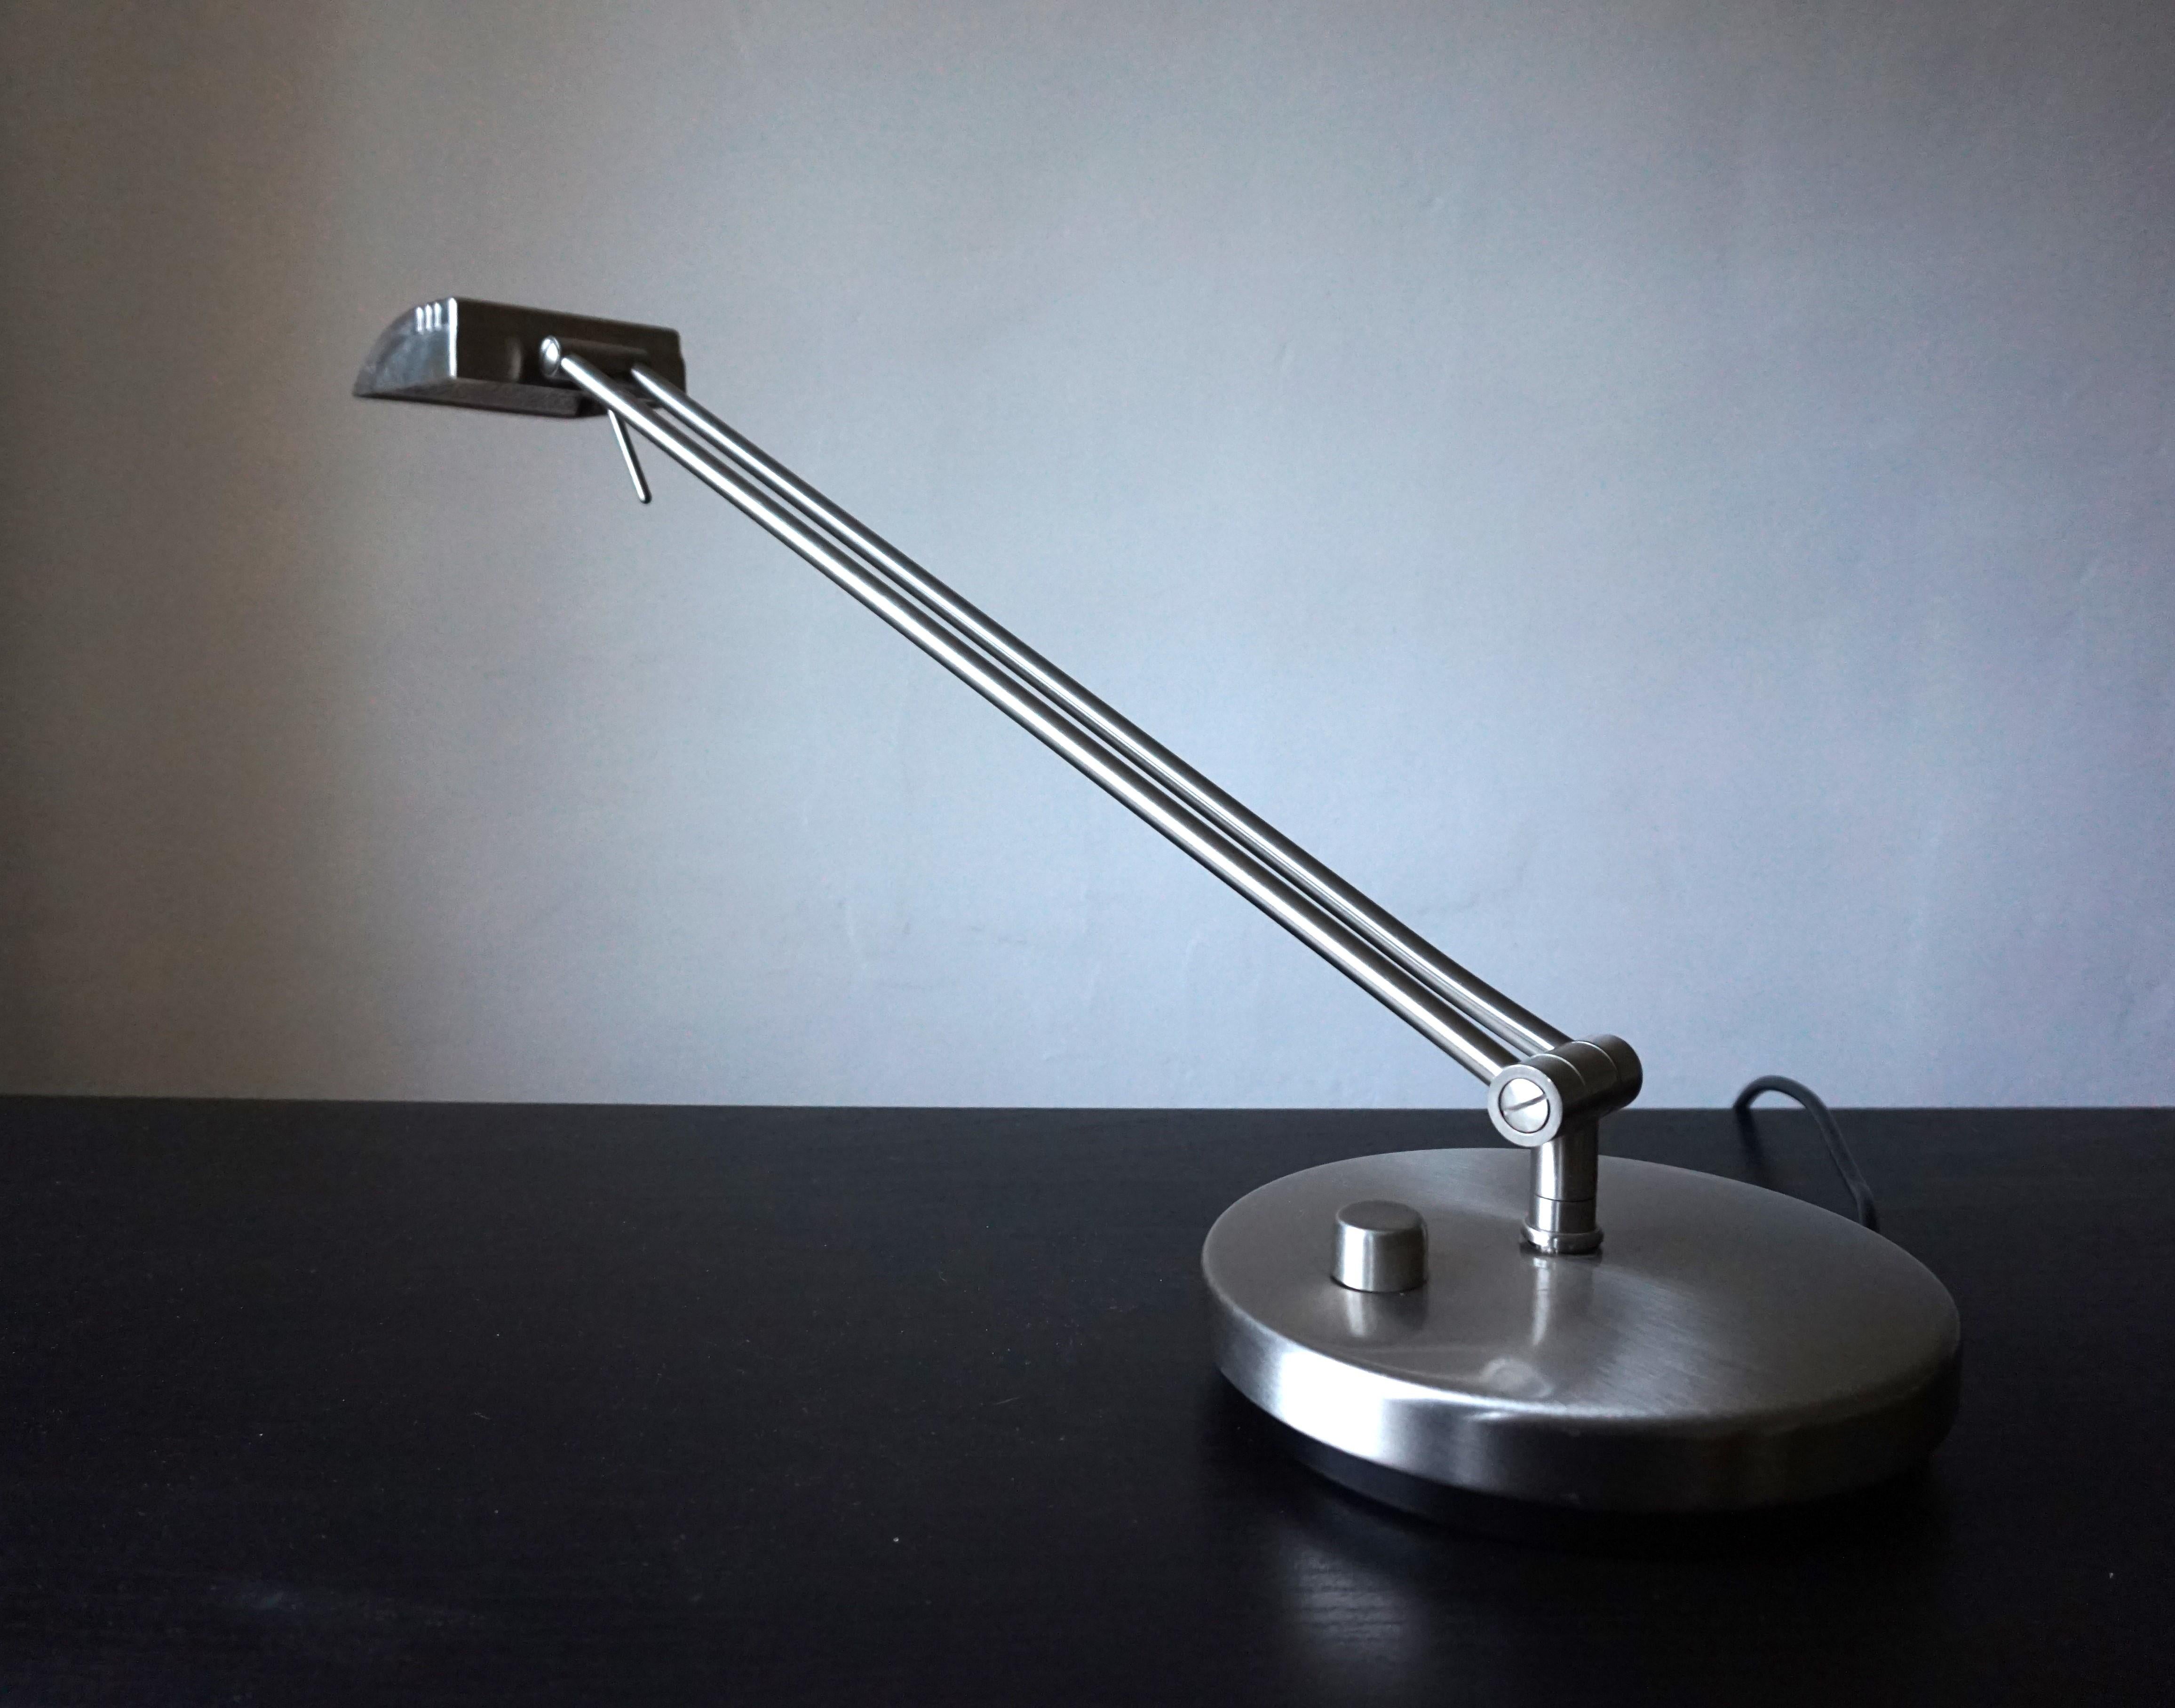 The stainless steel-colored table lamp, whose lines are based on Art Deco designs, is in excellent condition. The heavy lamp can be easily rotated around its own axis and the height of the arm is variable. The angle of the light head can also be